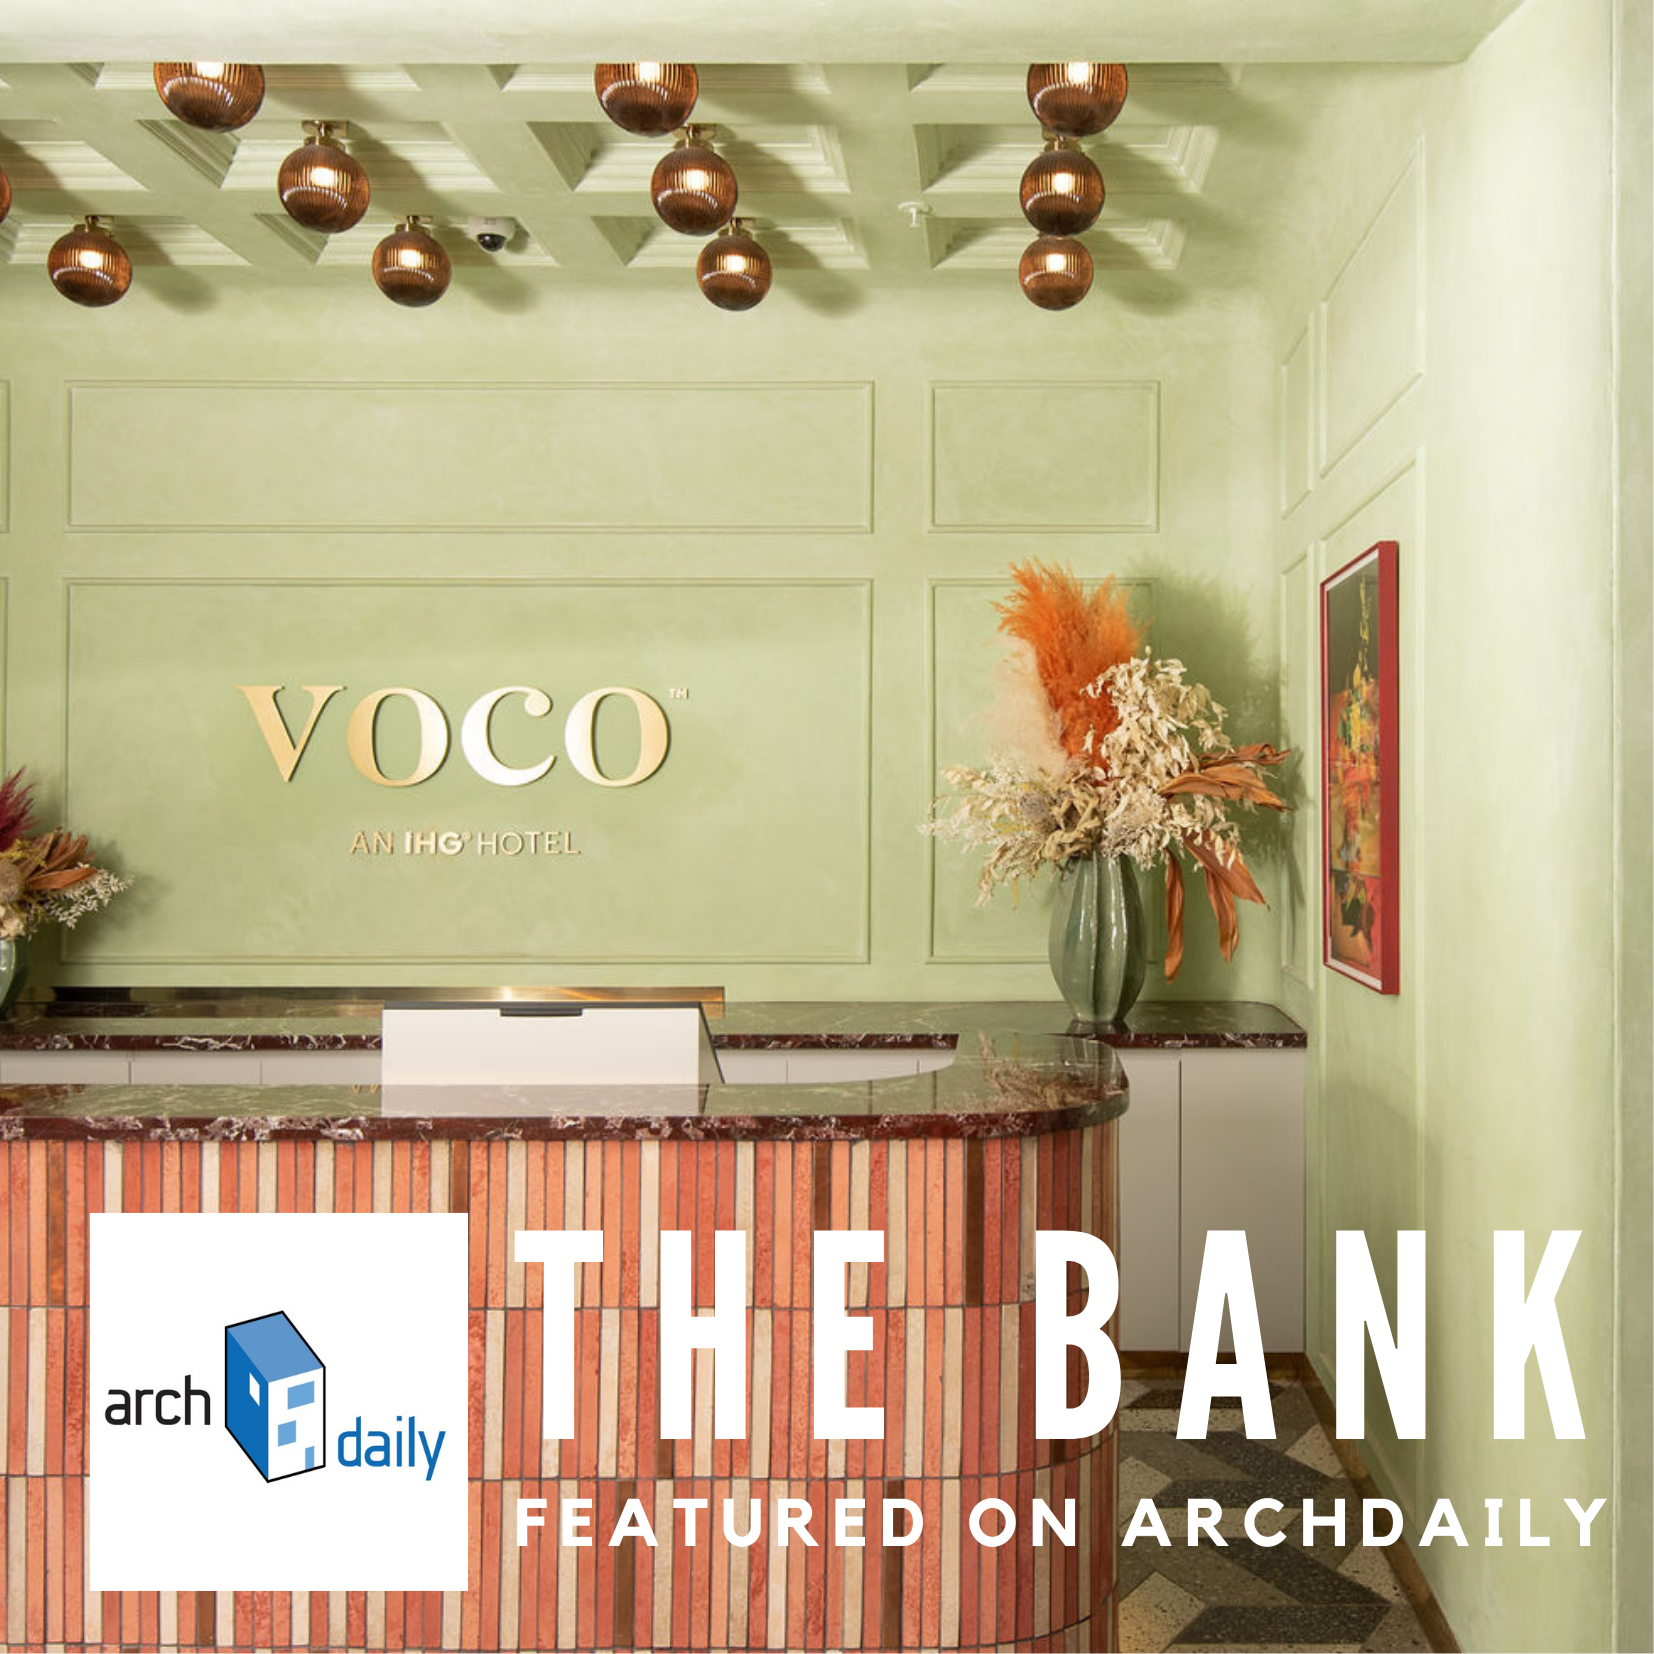 The Bank featured in ArchDaily